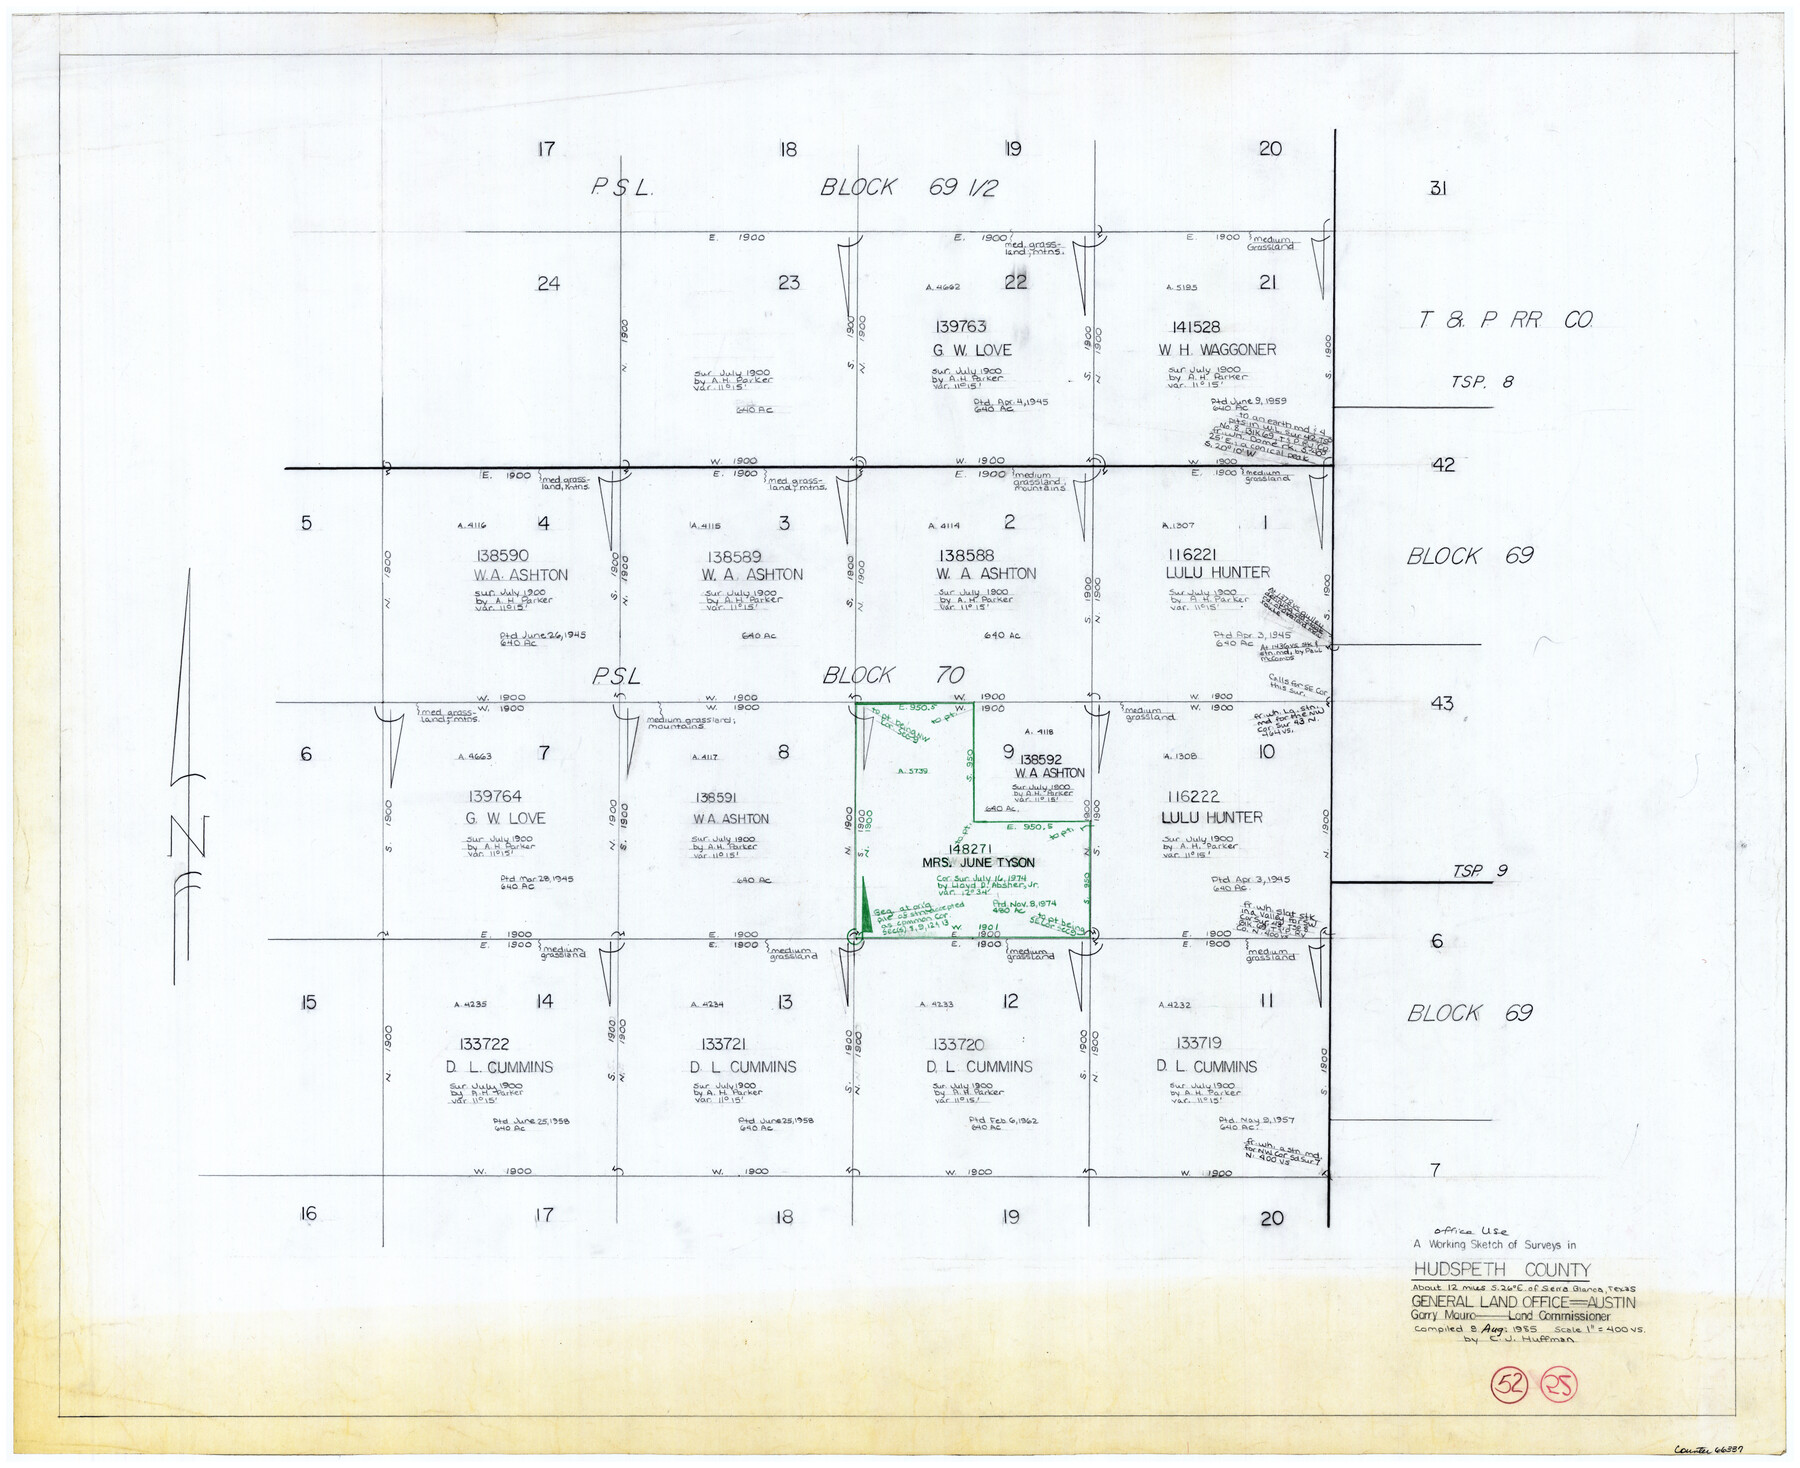 66337, Hudspeth County Working Sketch 52, General Map Collection